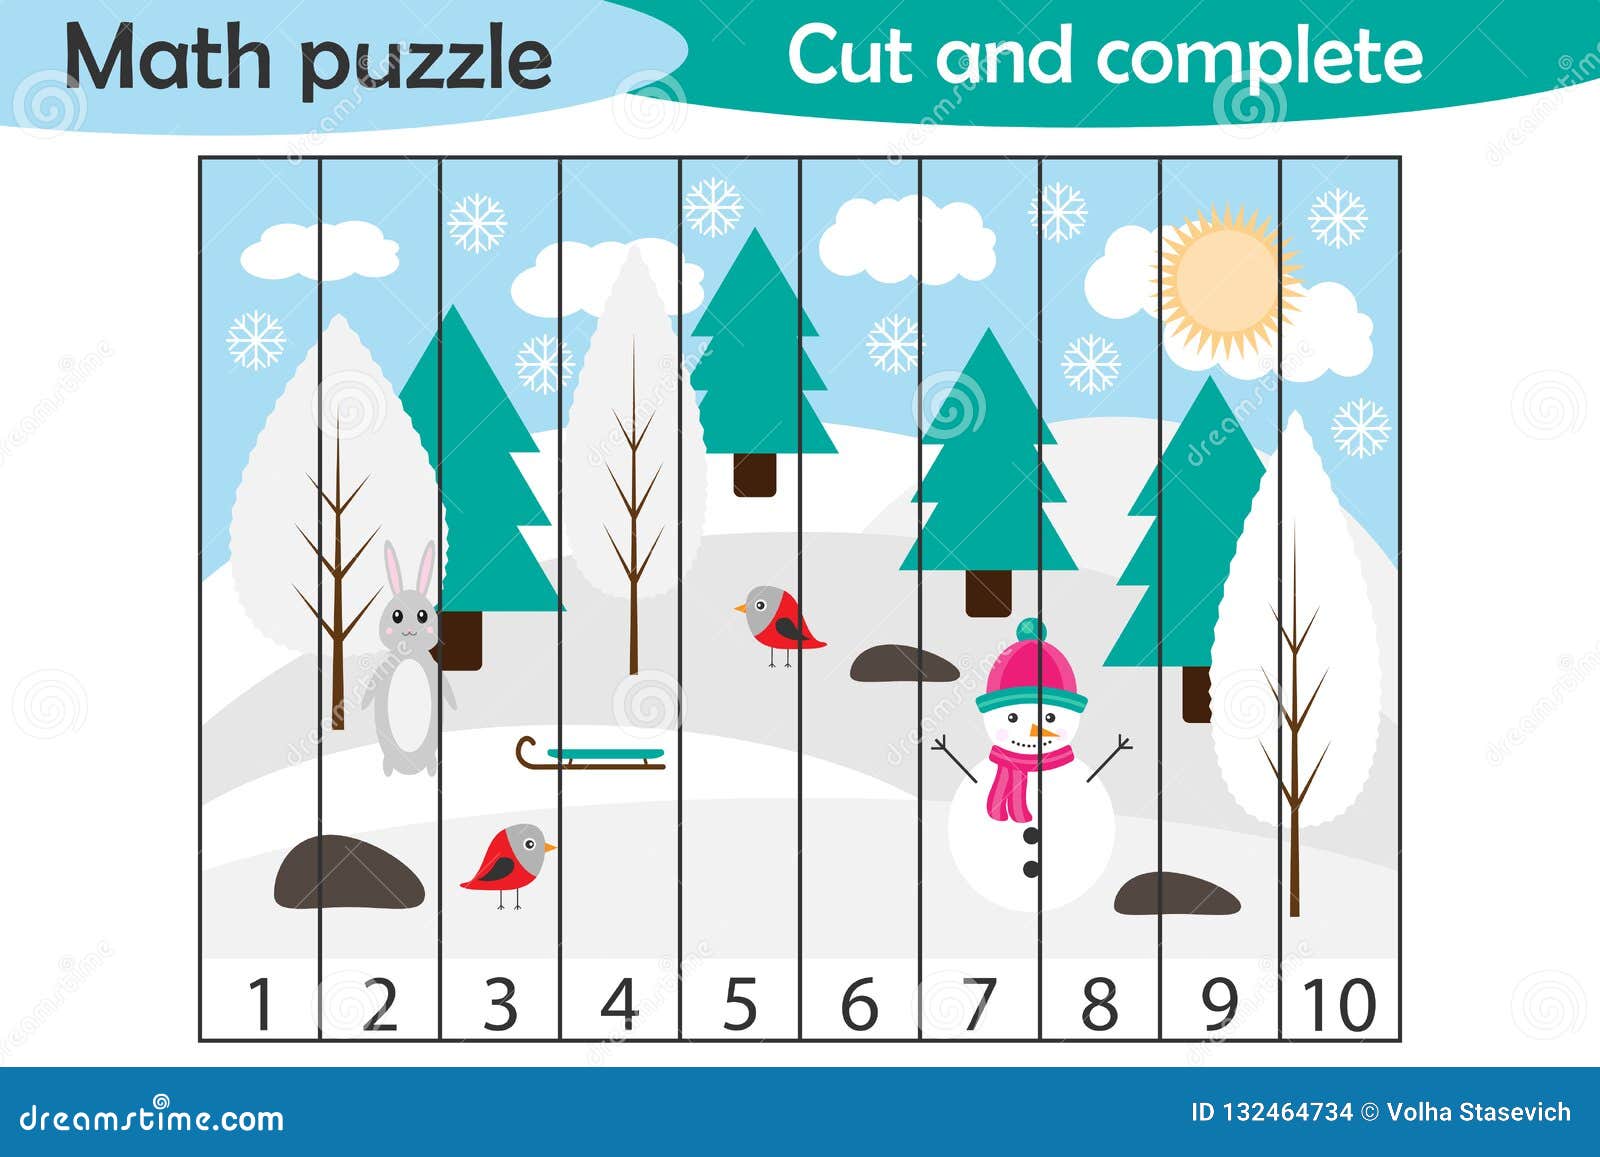 math puzzle, xmas picture with snowy forest in cartoon style, education game for development of preschool children, use scissors,